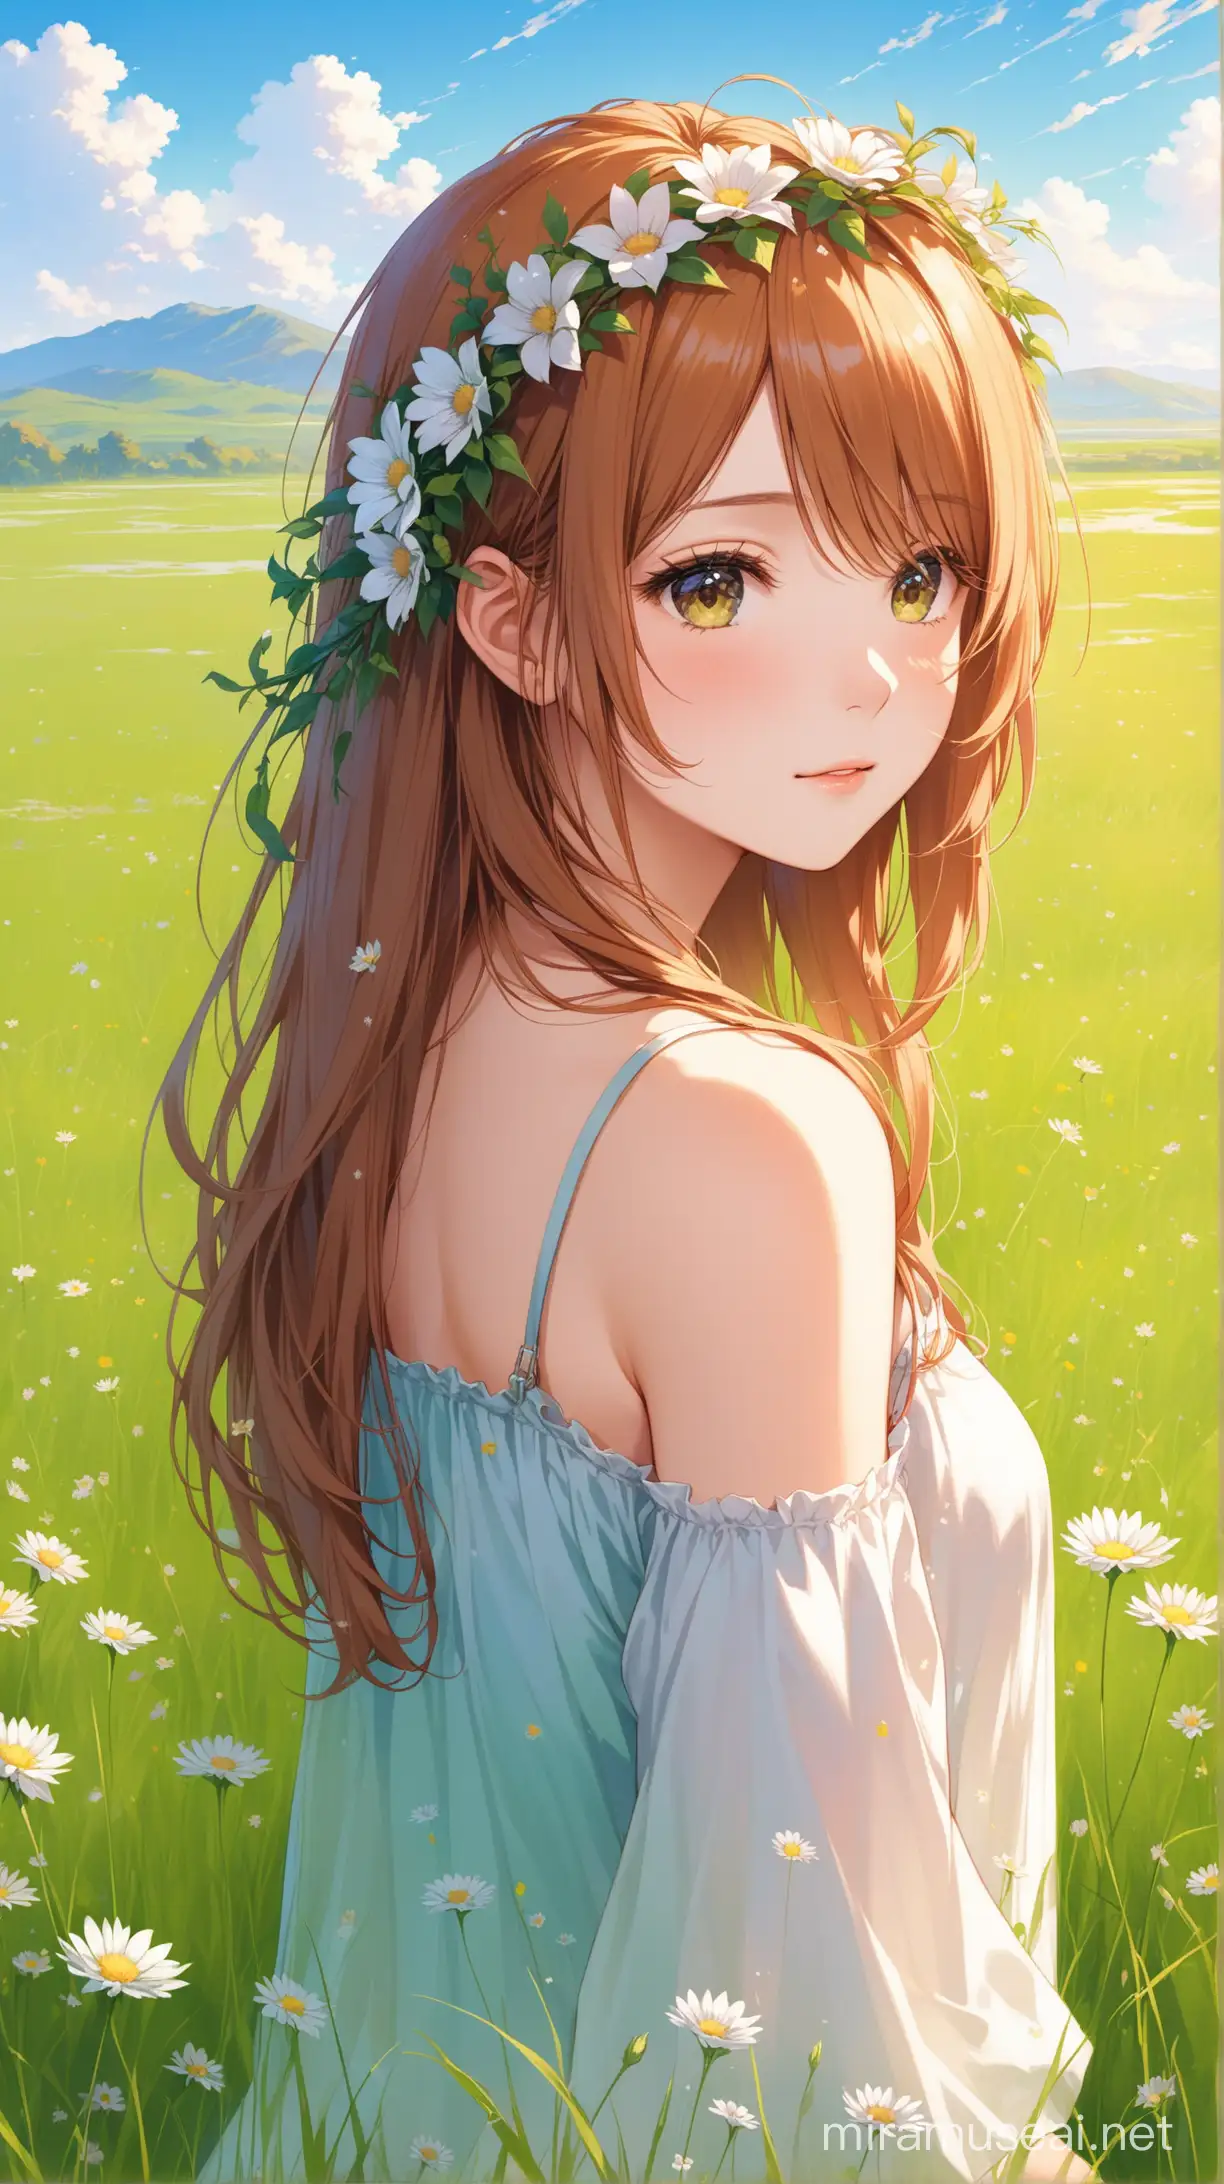 A young 20 years girl. Woth flowers on hair standing near a grassland